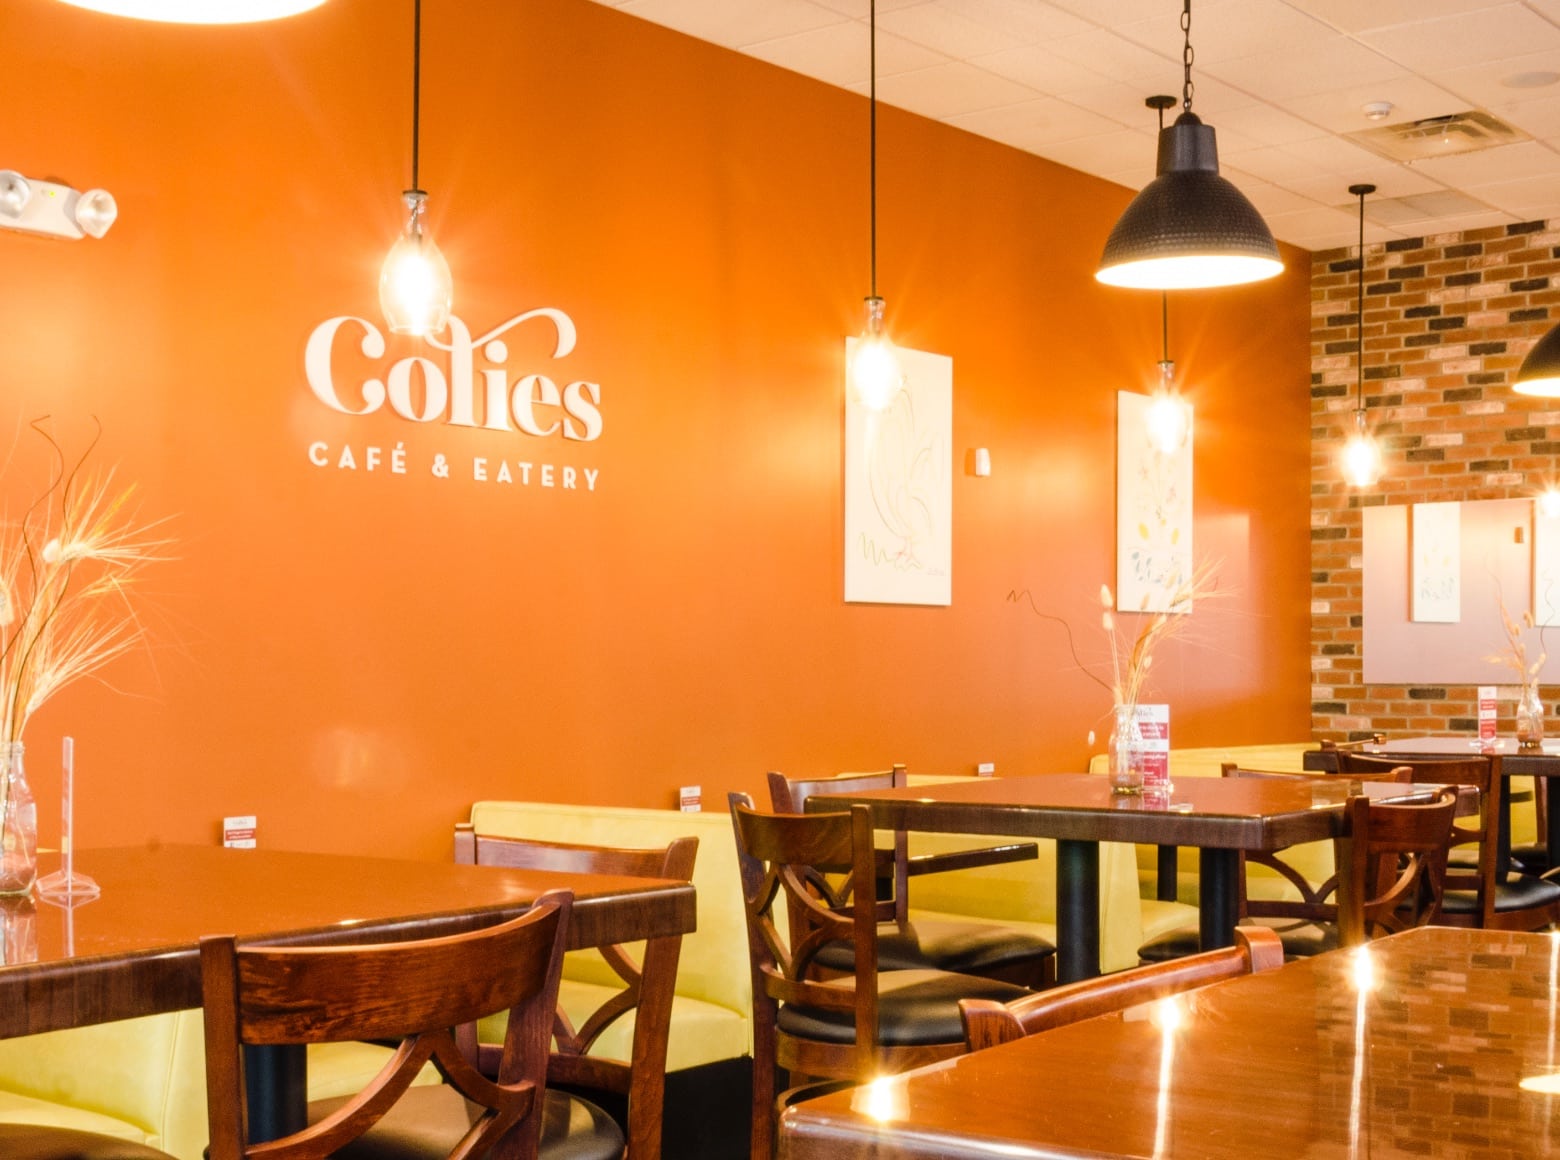 an image of a colie's cafe showing table and chairs